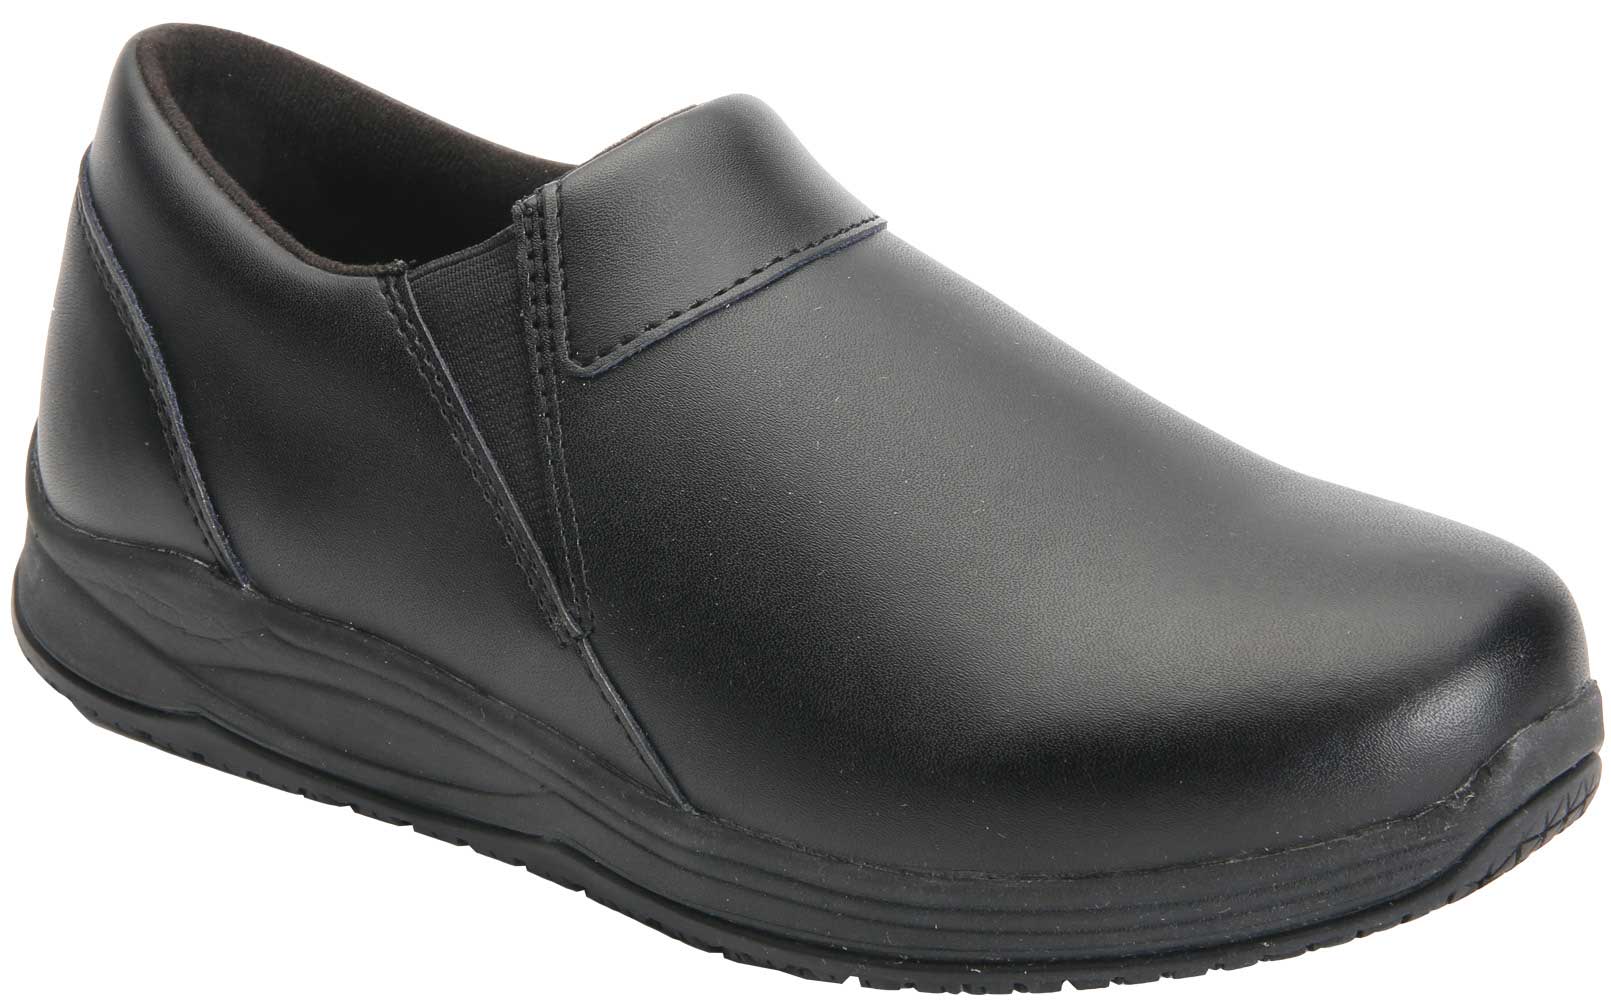 Drew Shoes Sage 13115 - Women's Casual Comfort Therapeutic Diabetic Shoe - Extra Depth For Orthotics